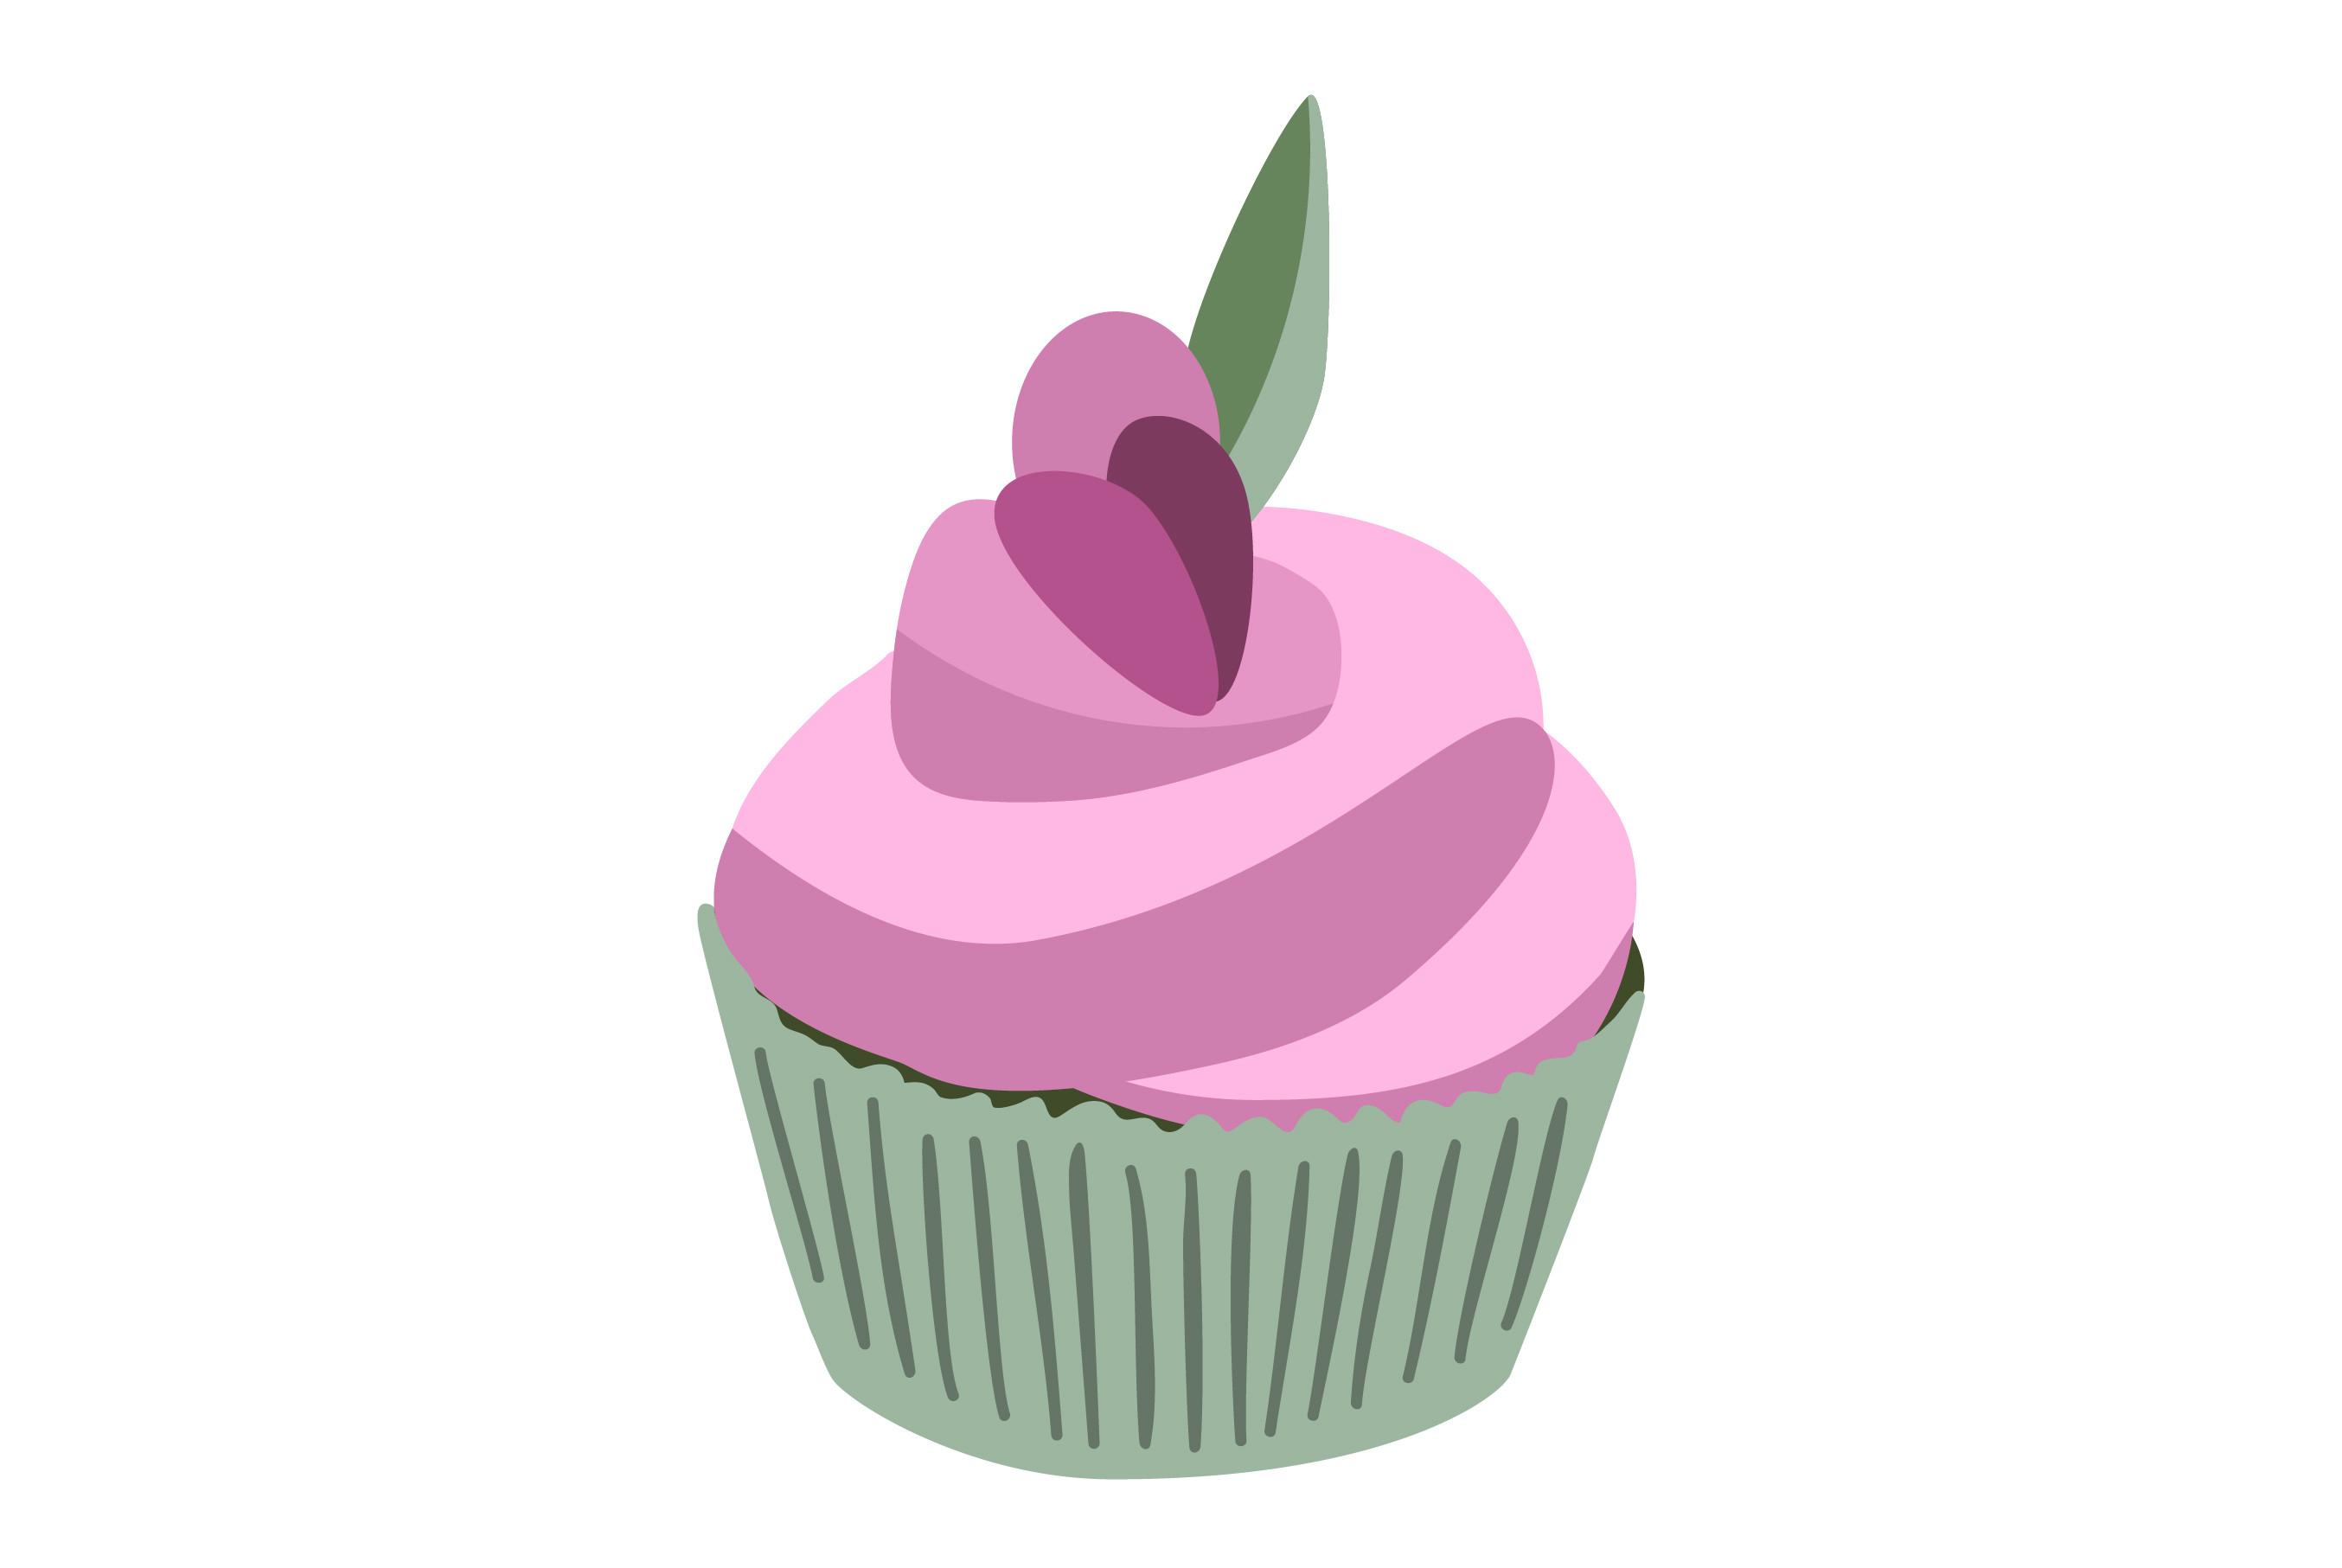 Cartoon Pink Cupcake Isolated on White